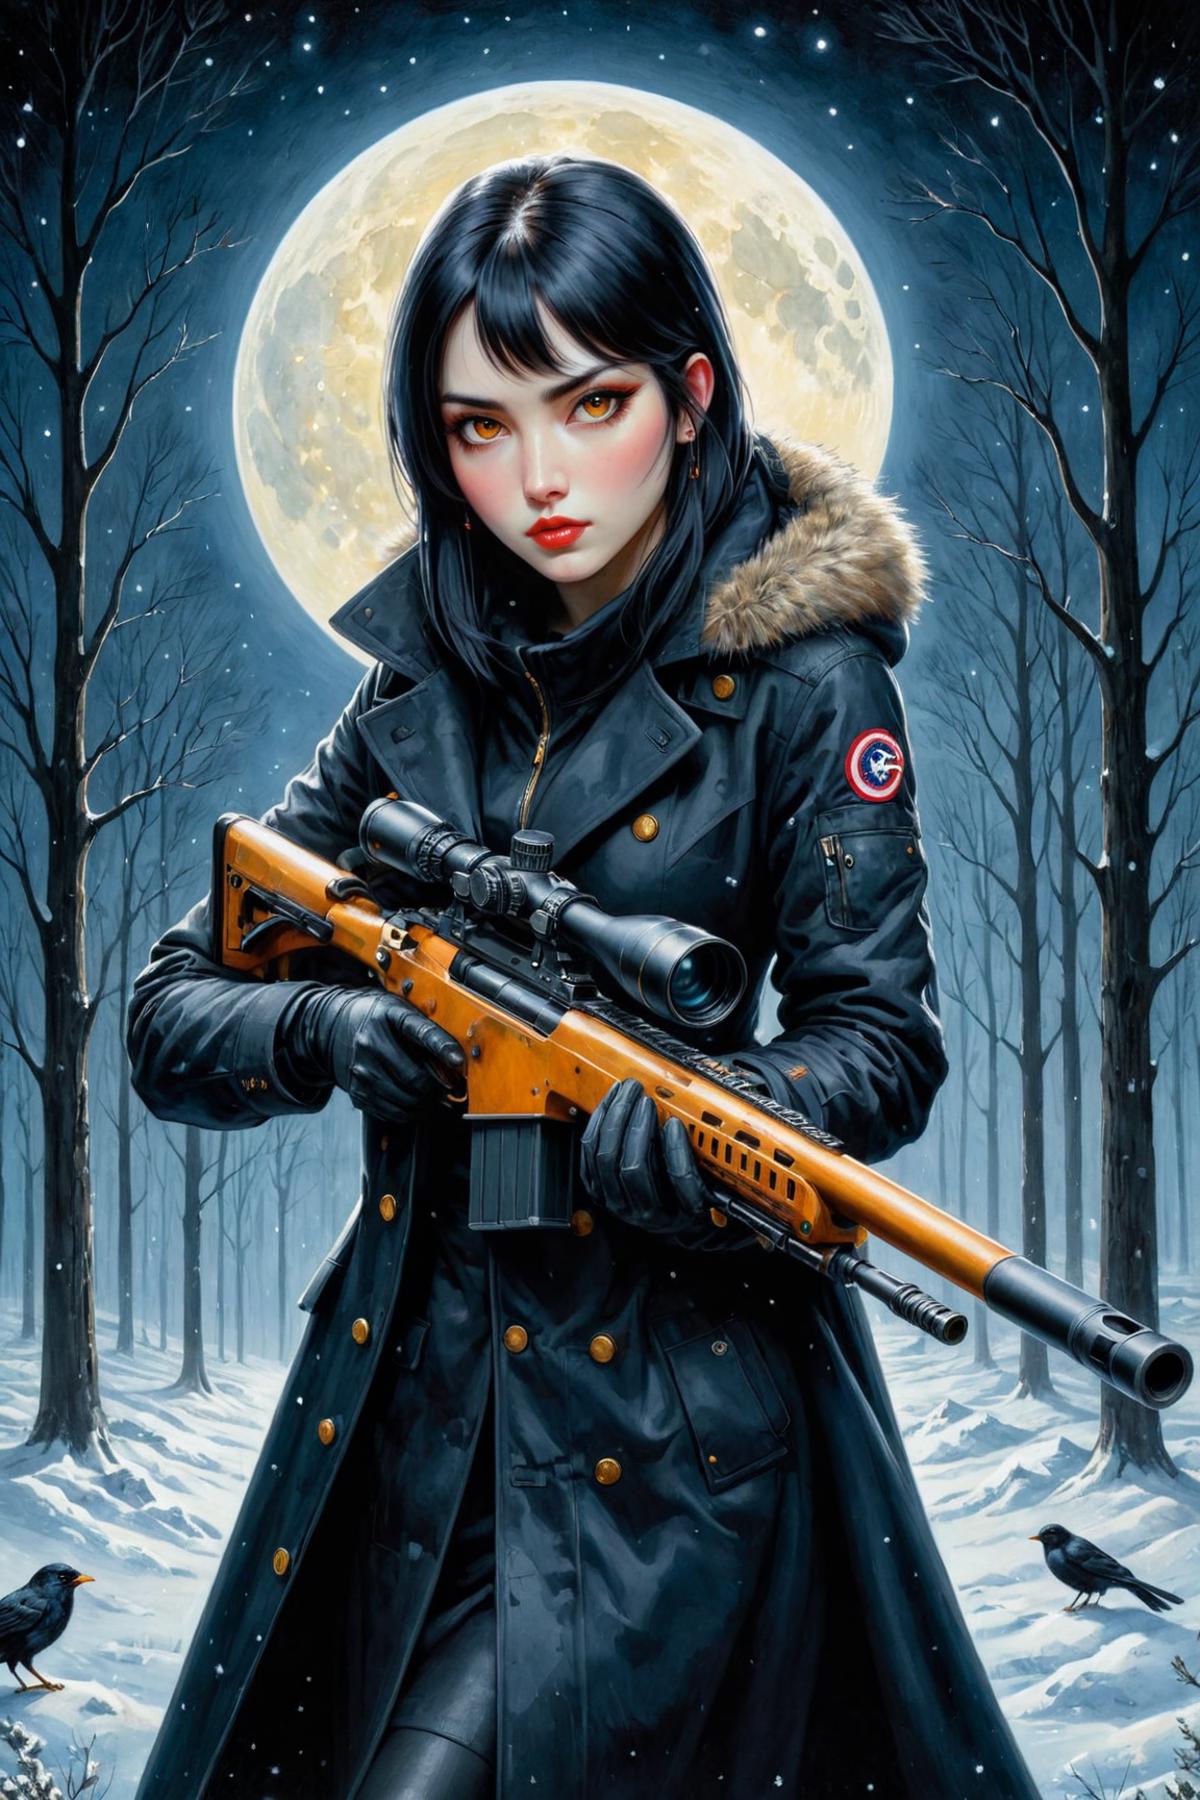 A girl with an assault rifle and a moon in the background.